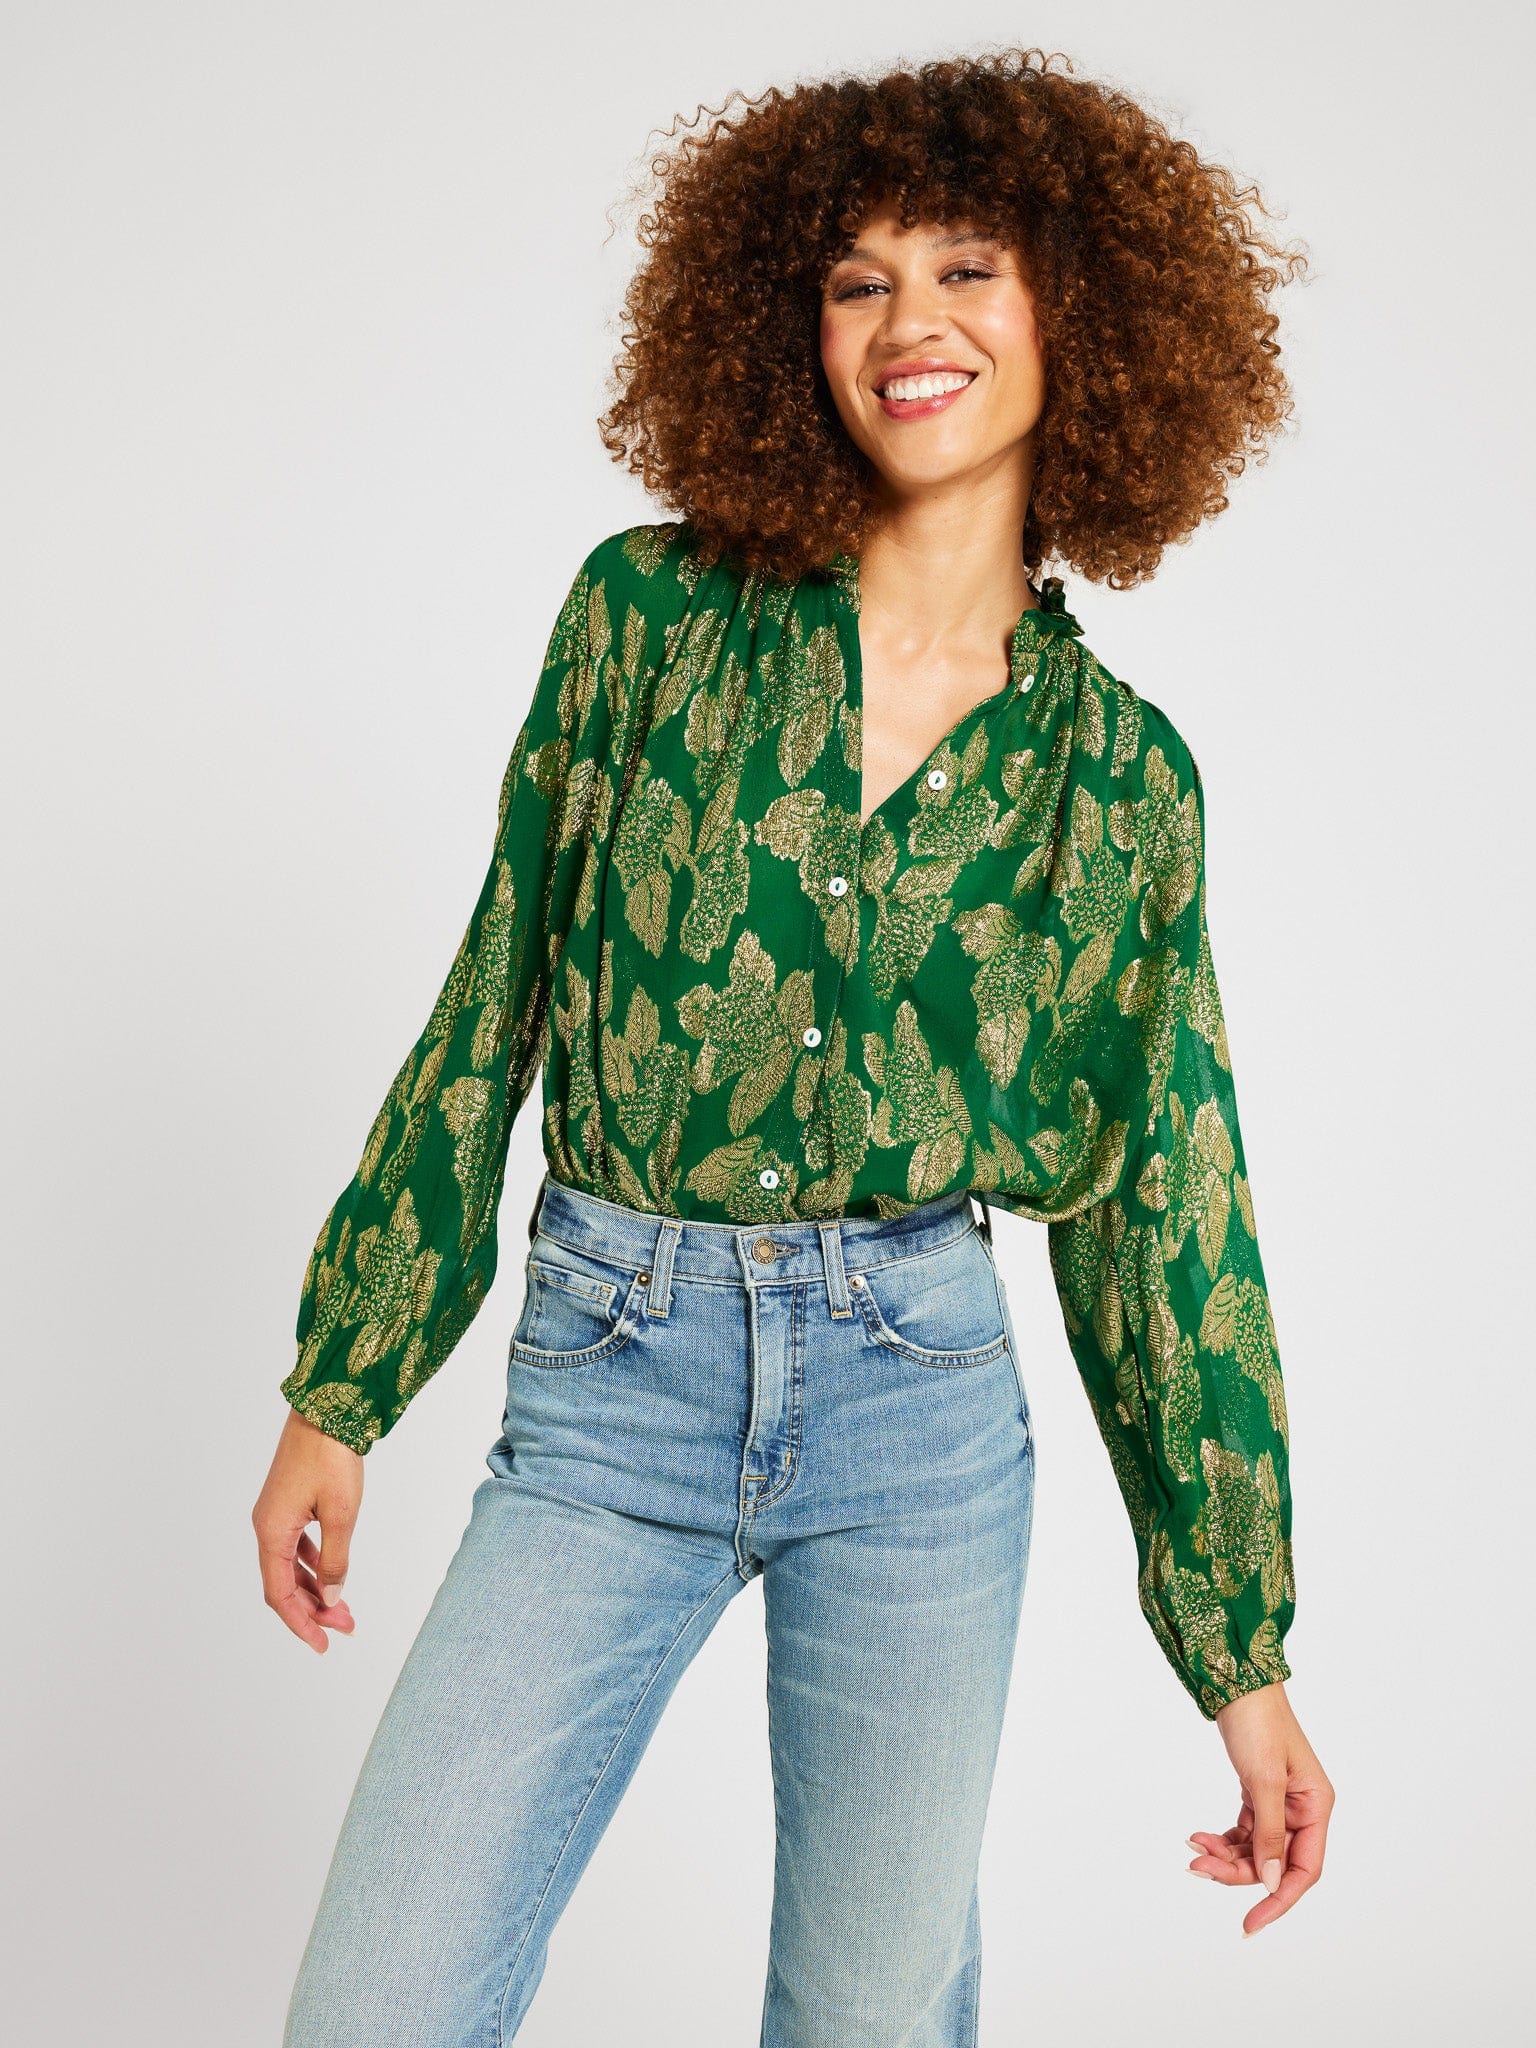 MILLE Clothing Francesca Top in Malachite Shimmer